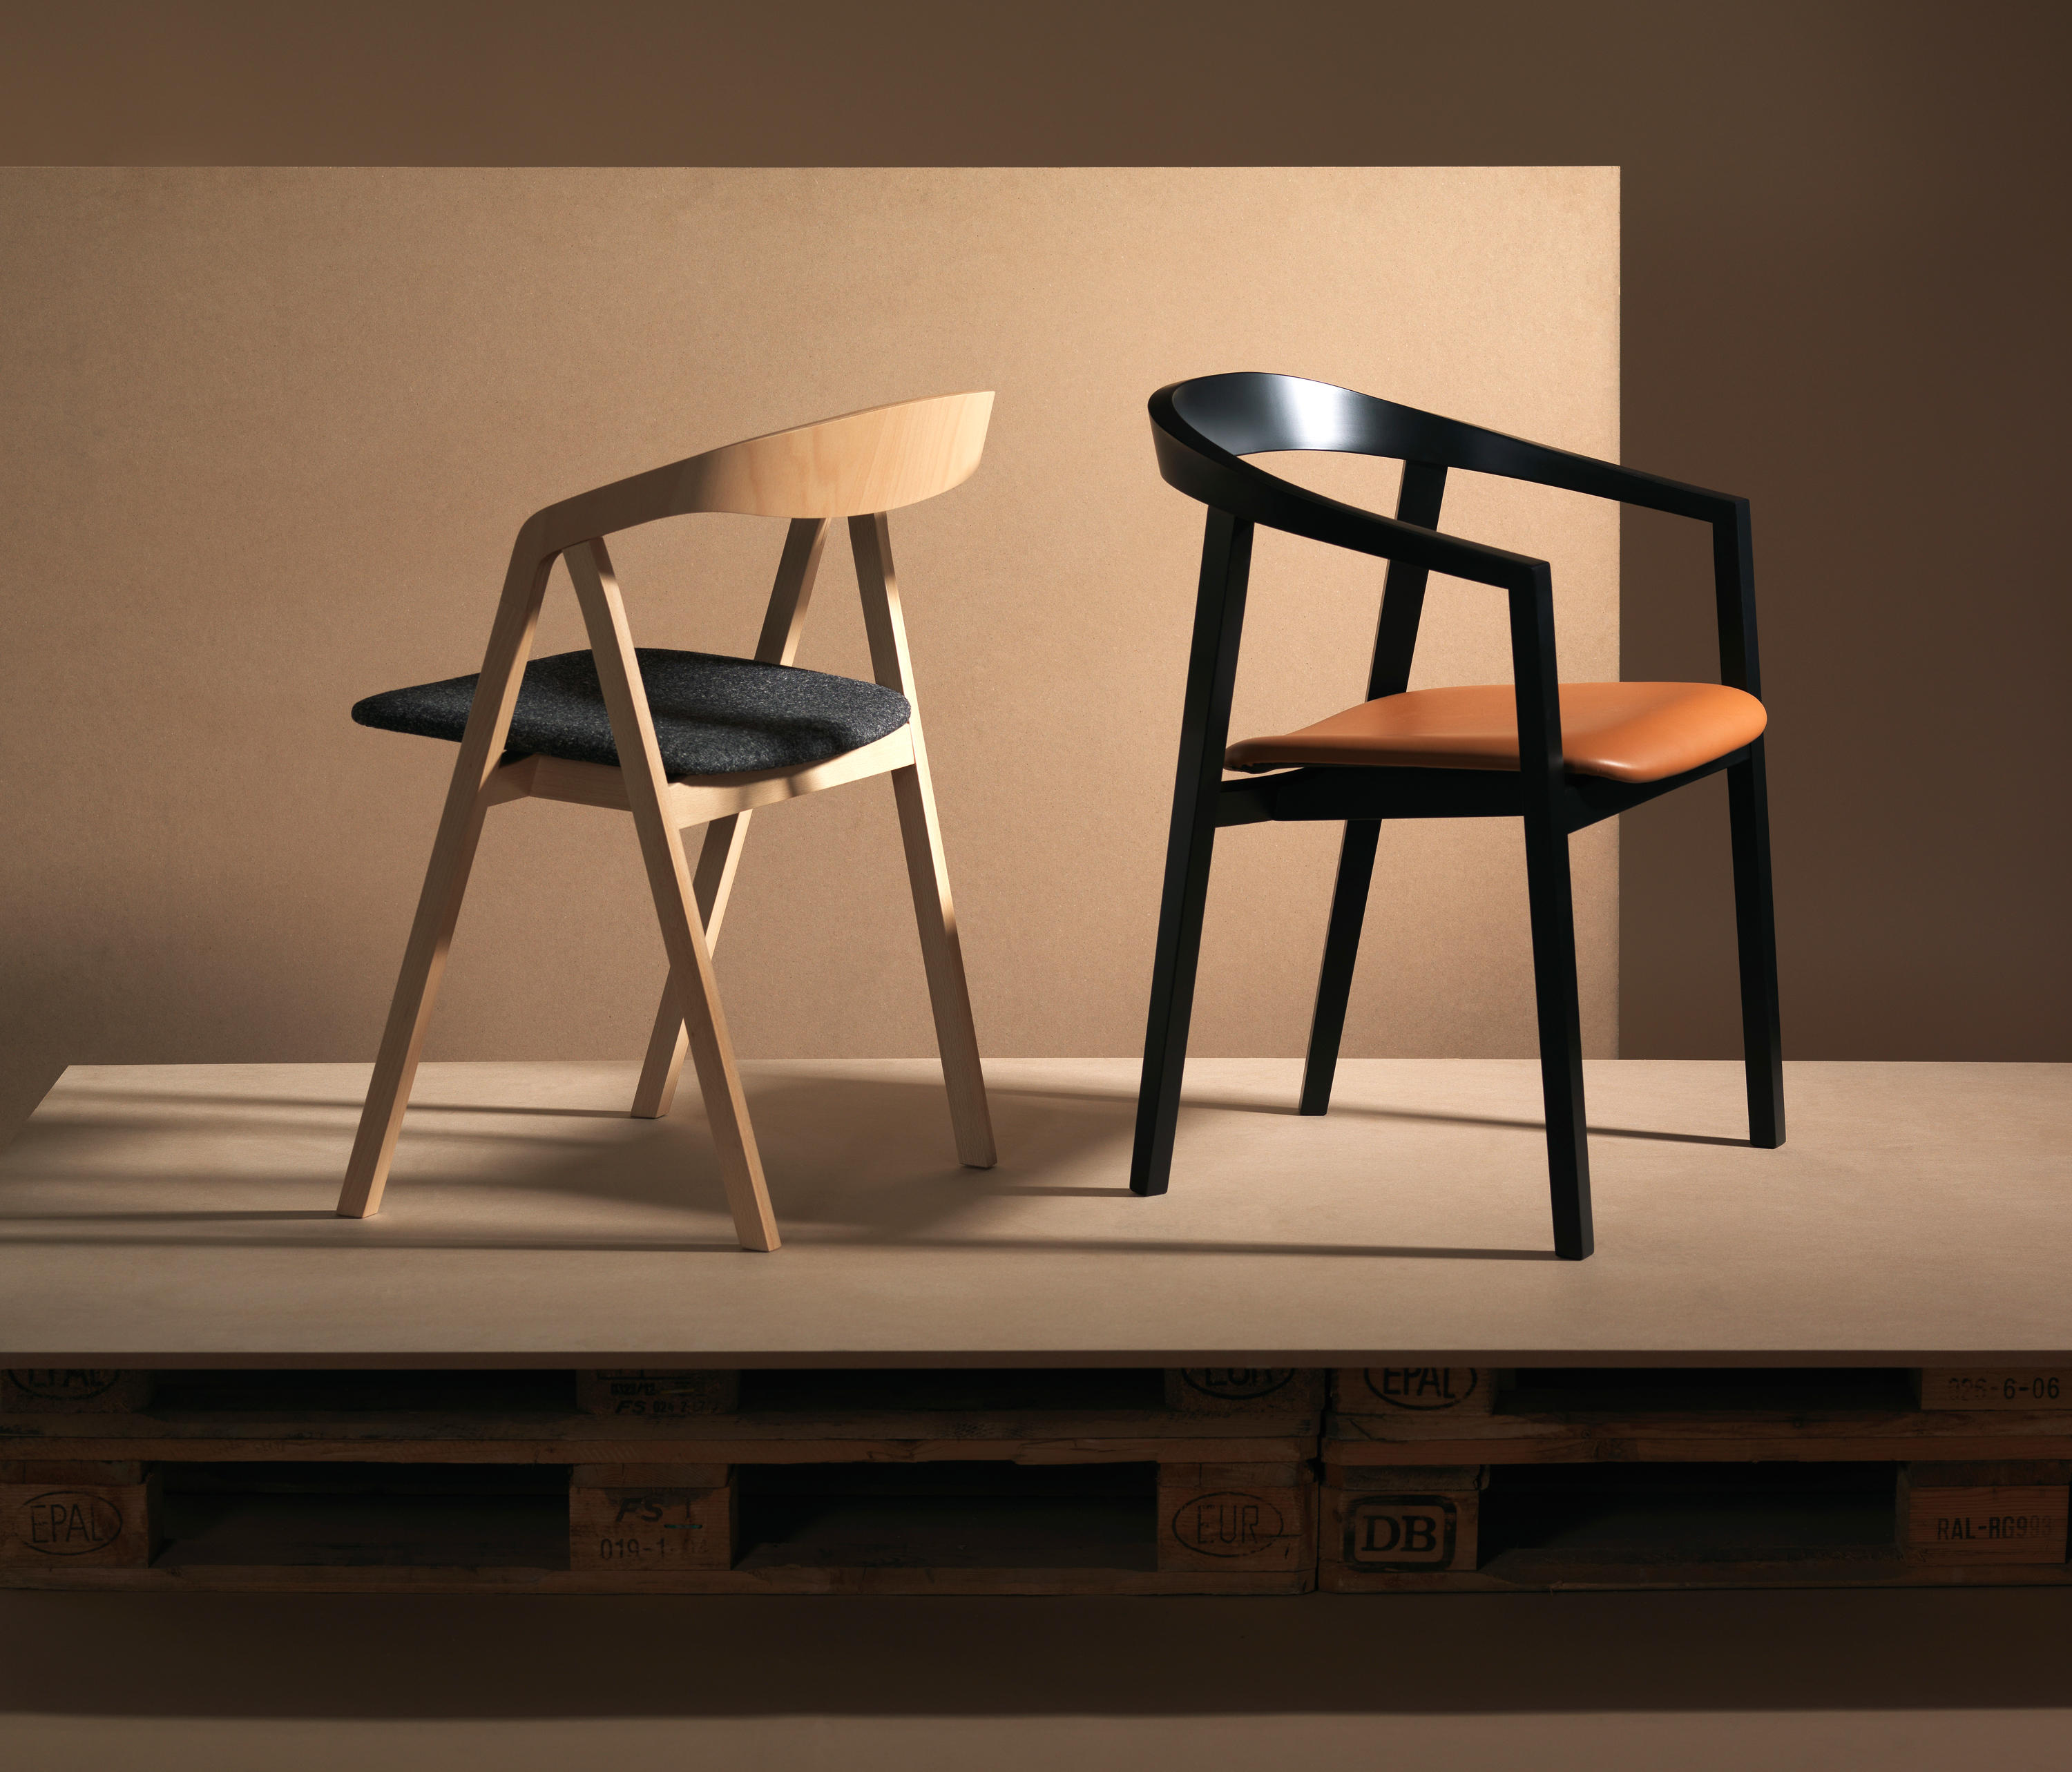 STA - Chairs from Aldo Architonic